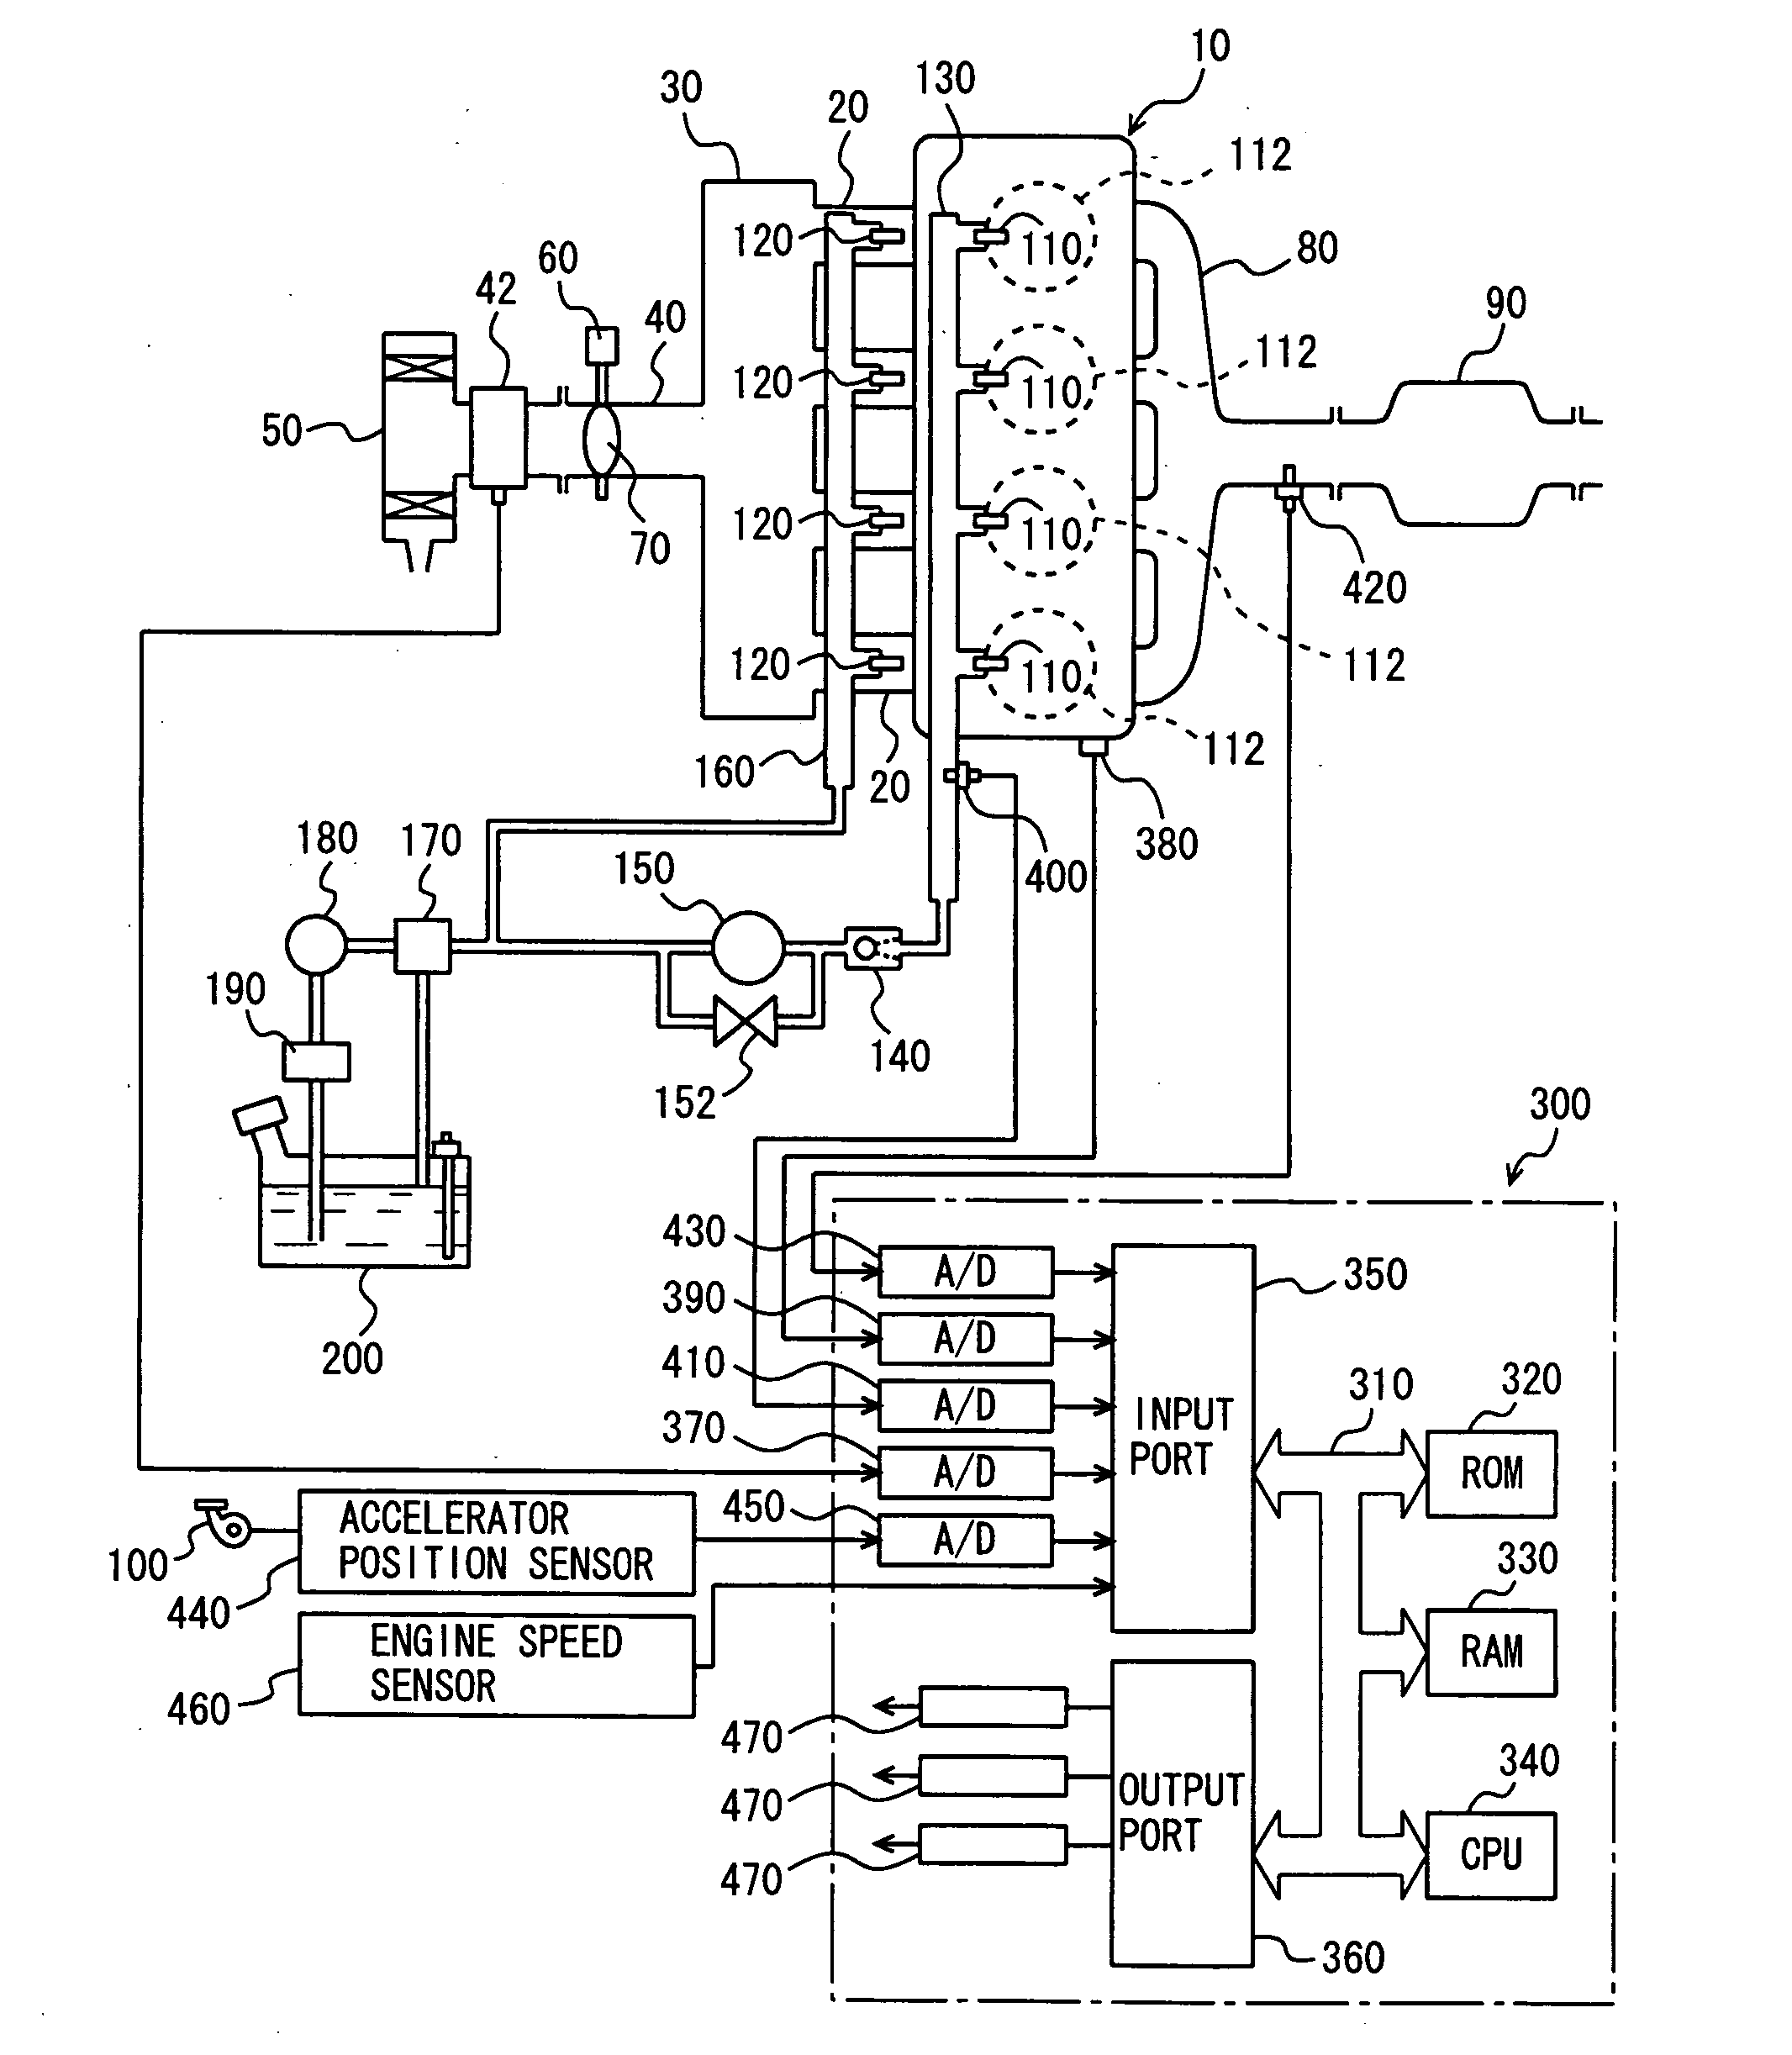 State determination device for internal combustion engine